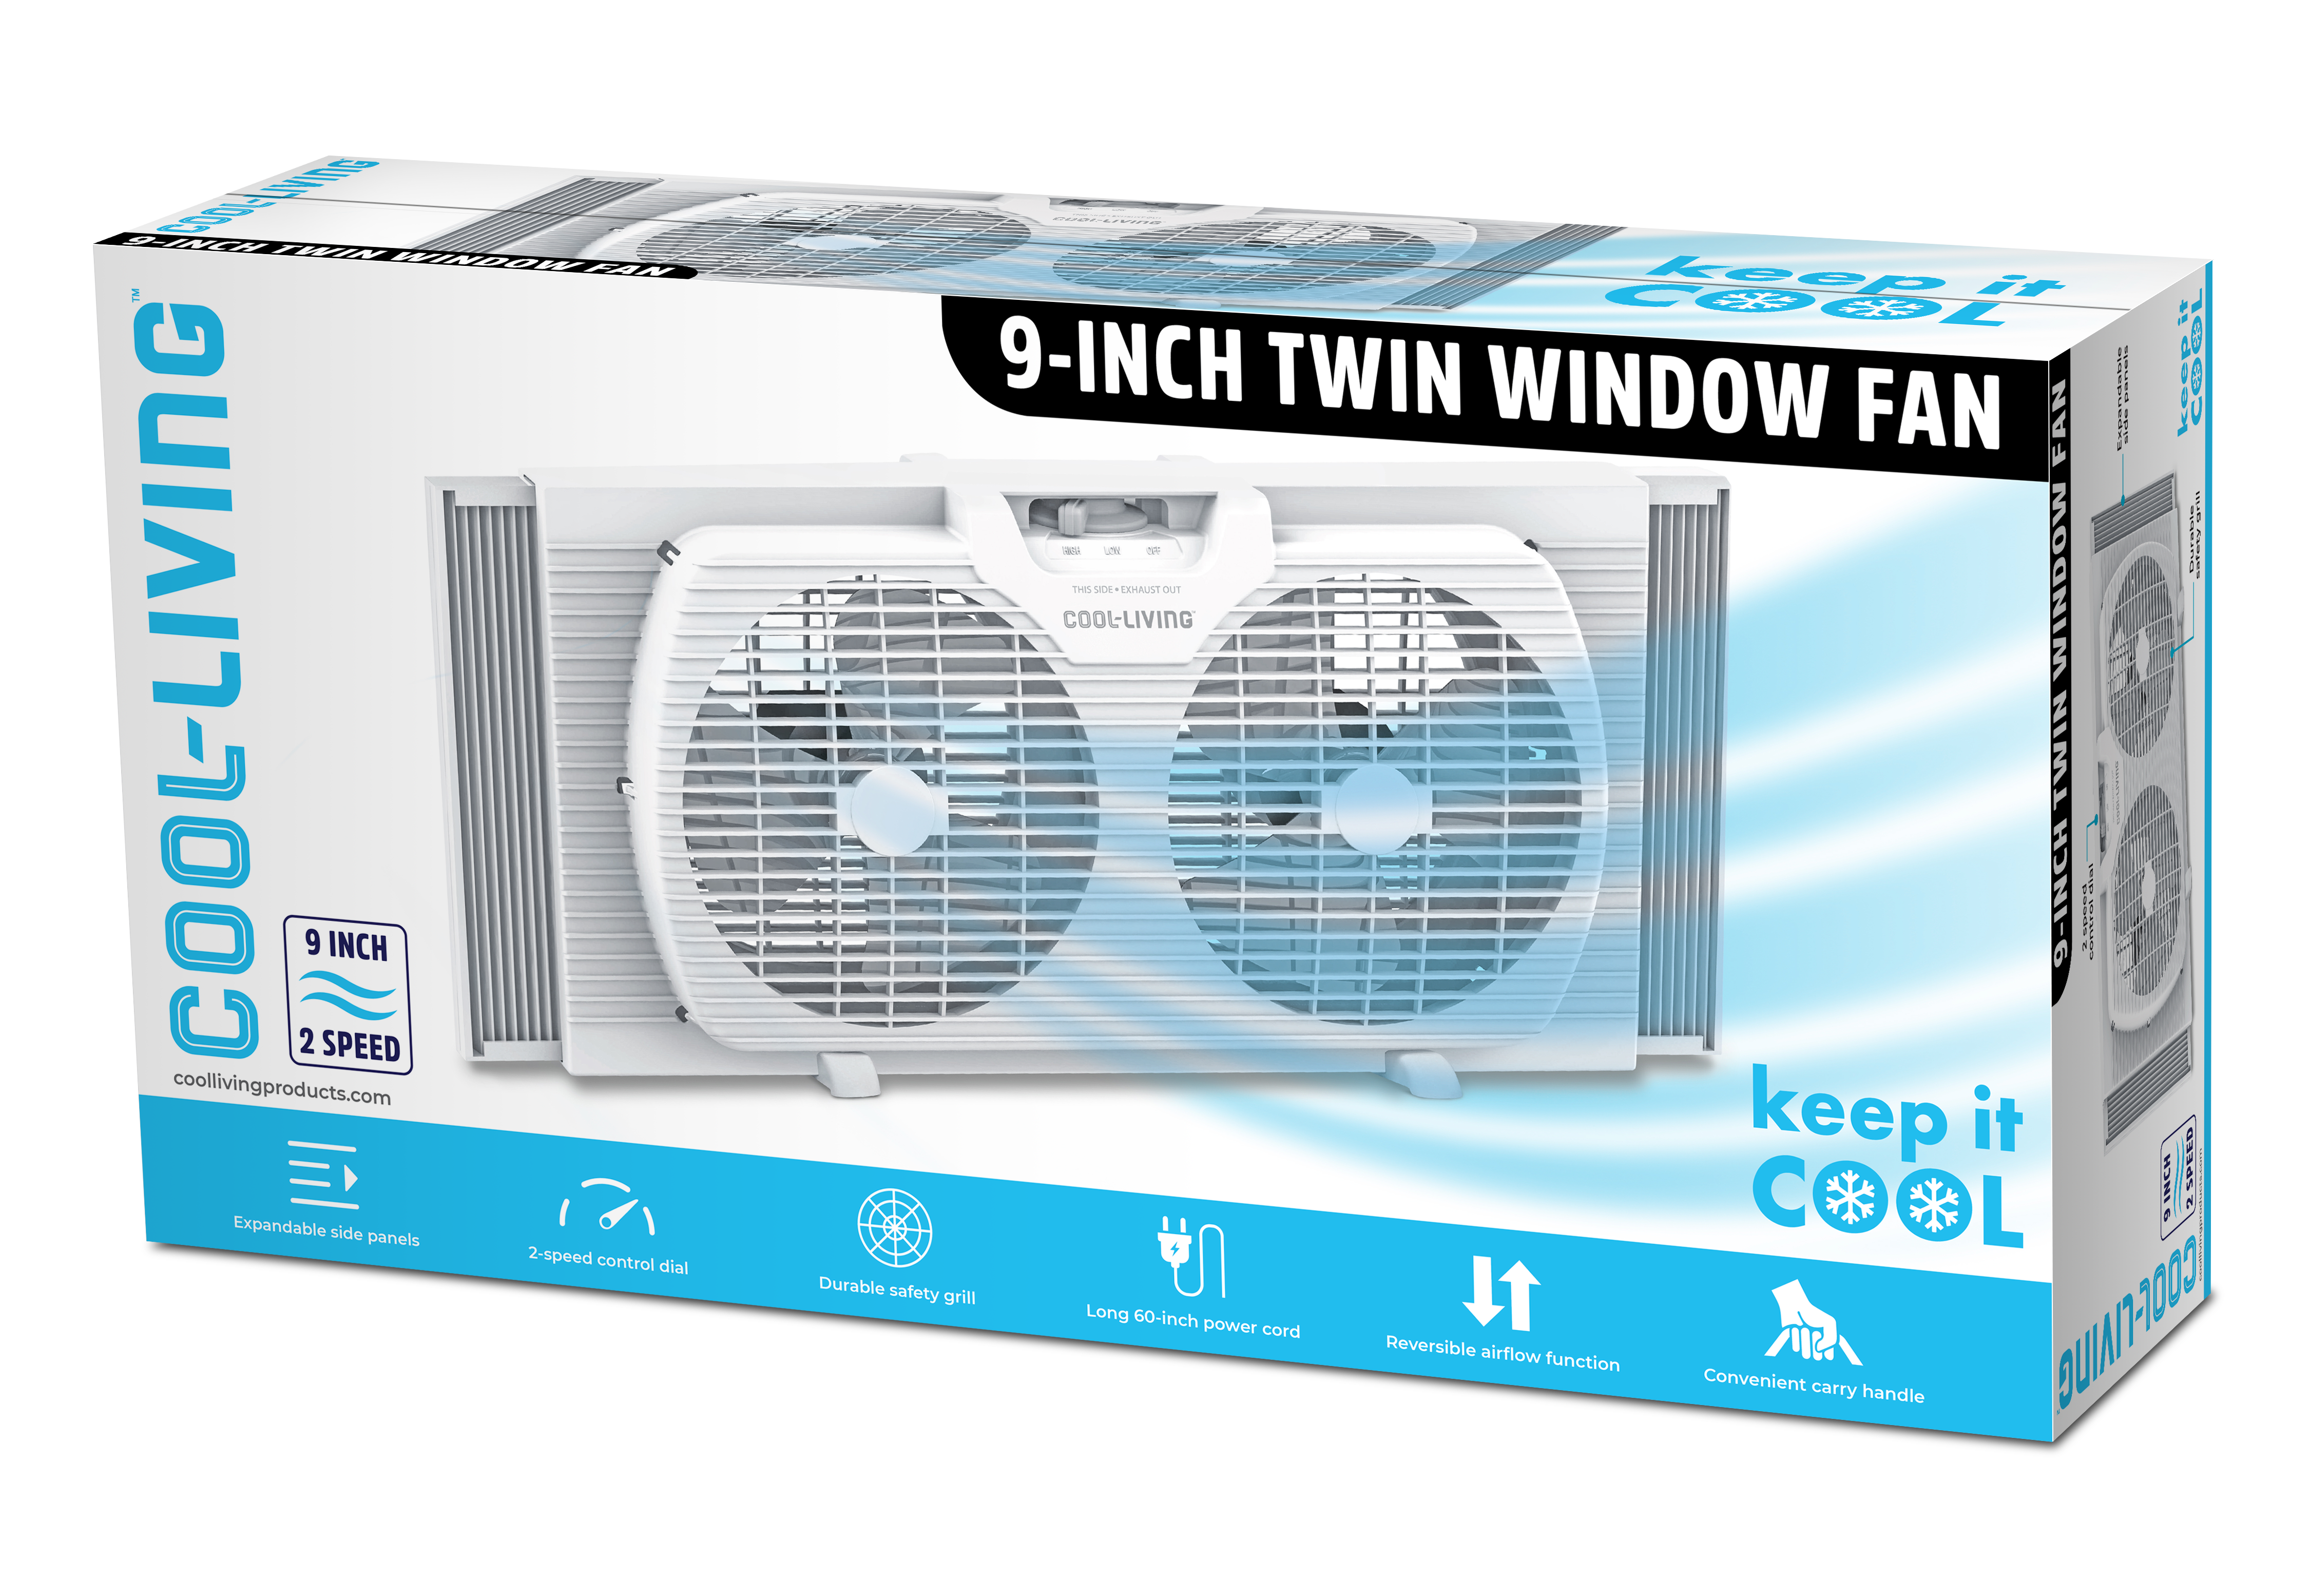 9" Twin Window Fan with Reversible Airflow Control, Auto-Locking Expanders, Convenient Carry Handle and 2-Speed Fan Switch, Ideal for Home, Kitchen, Bedroom & Office